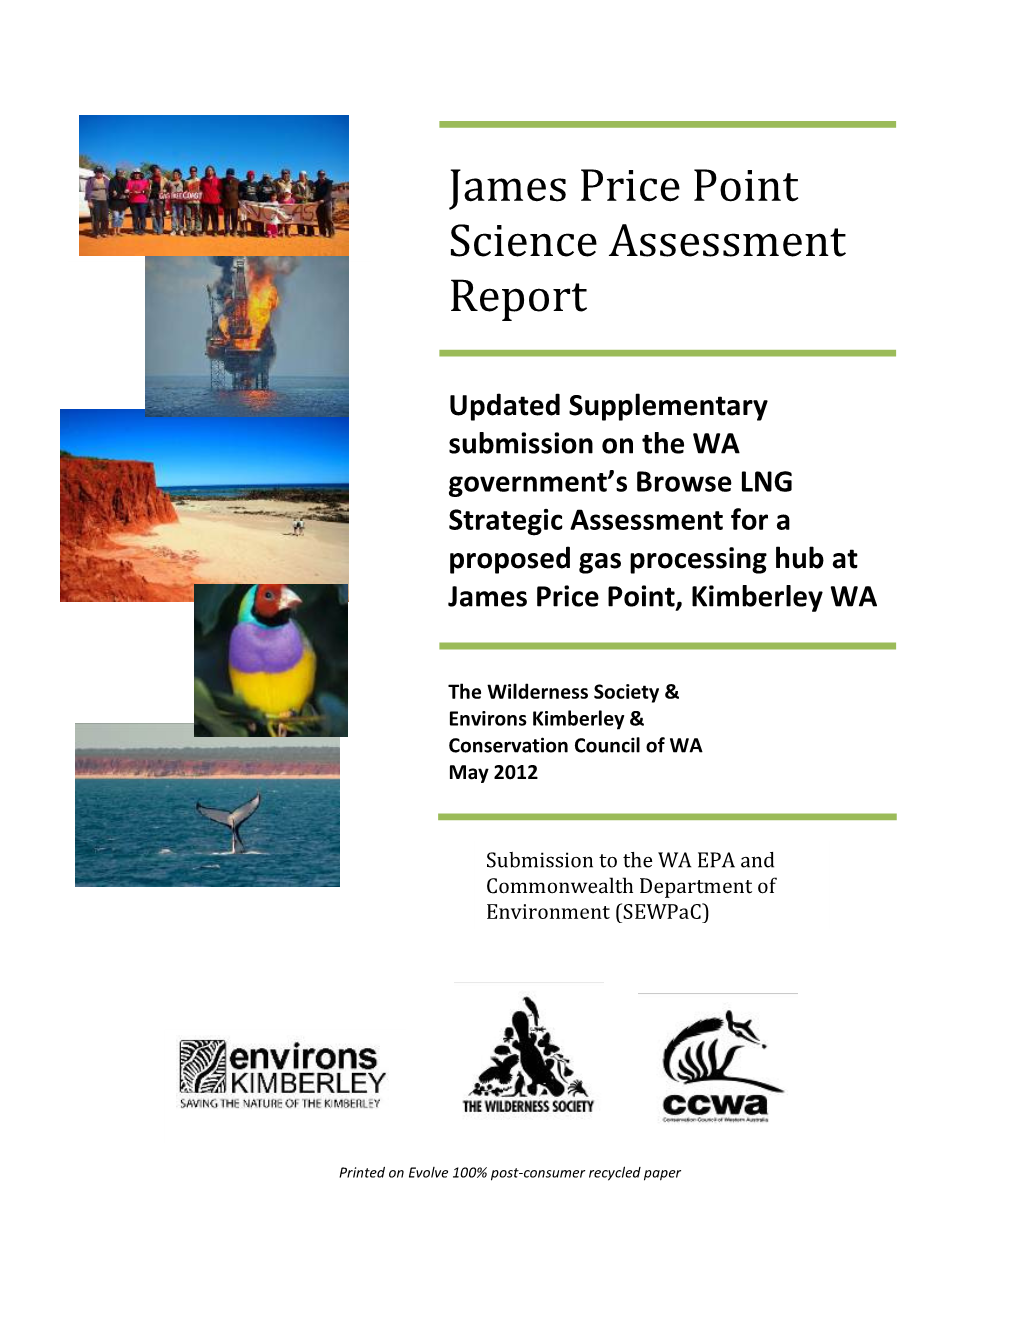 James Price Point Science Assessment Report